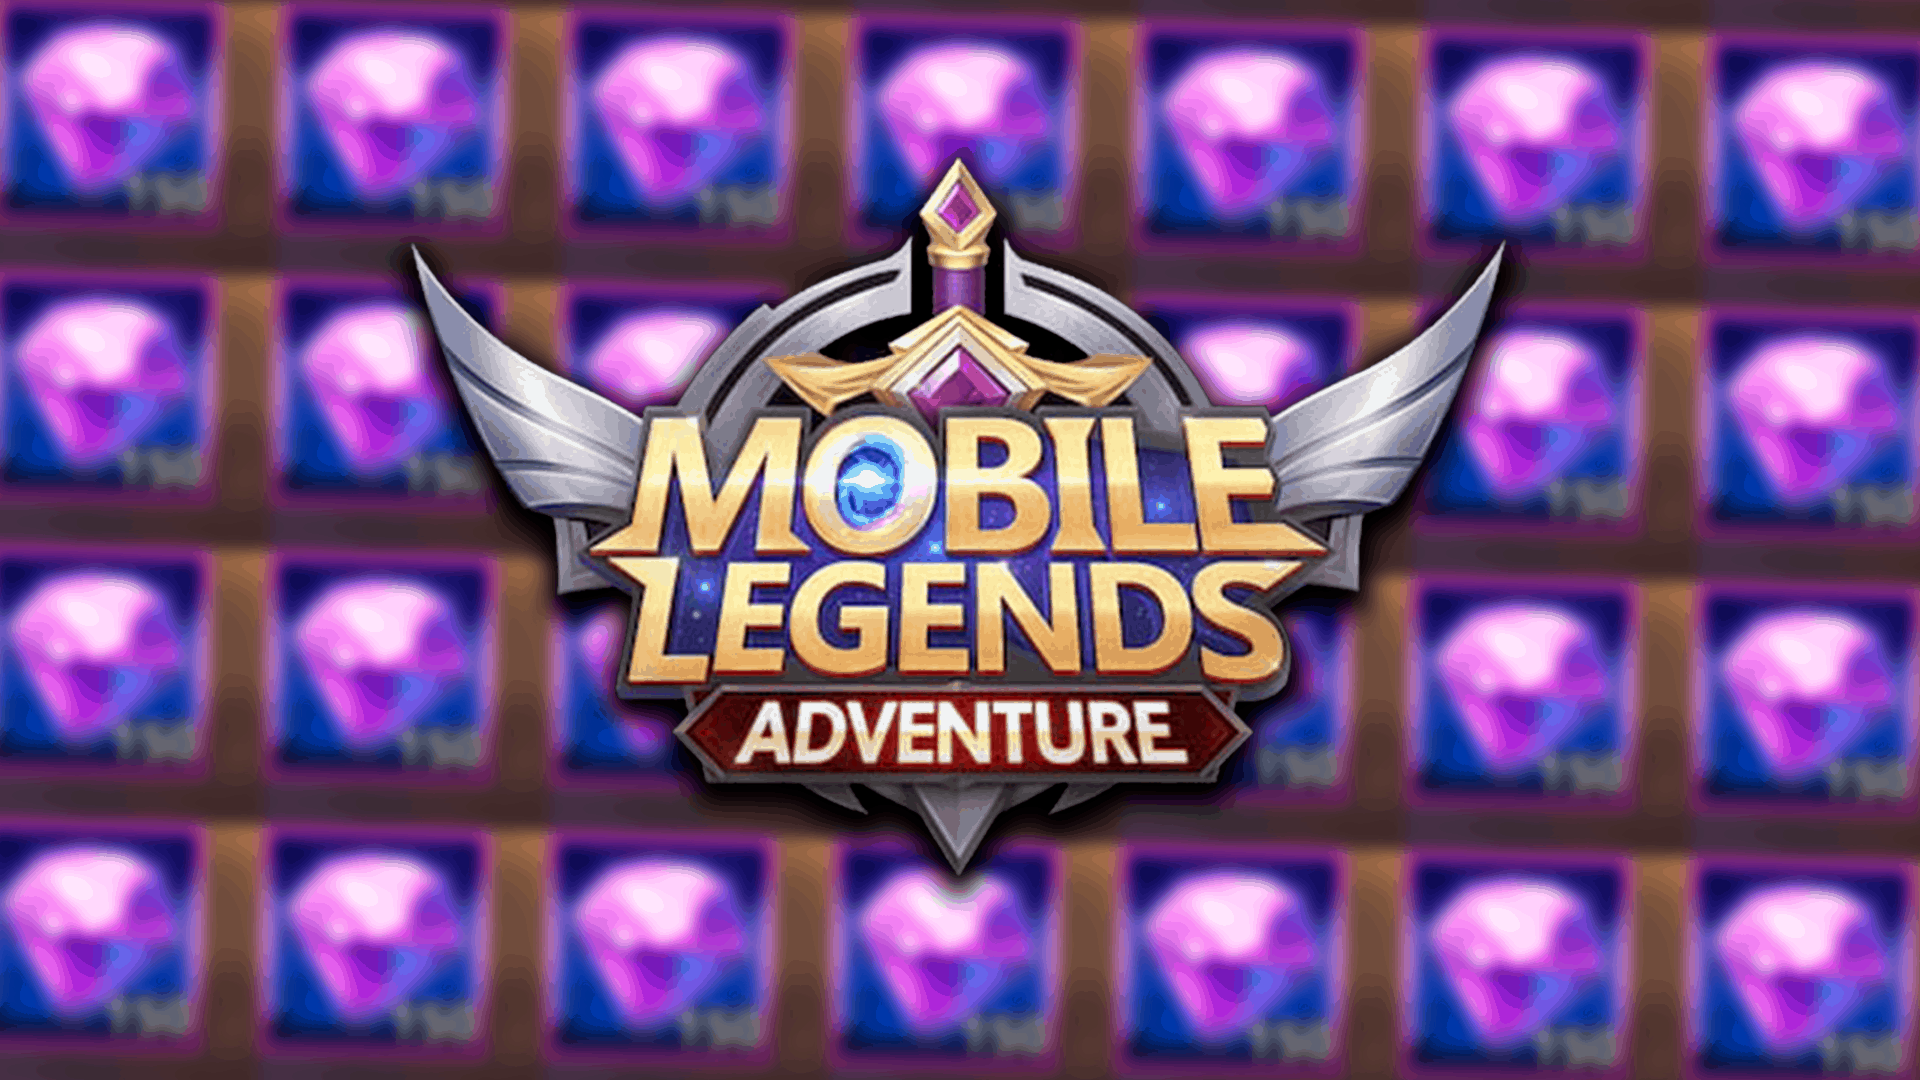 You are currently viewing Mobile Legends: Adventure – How To Get Diamonds